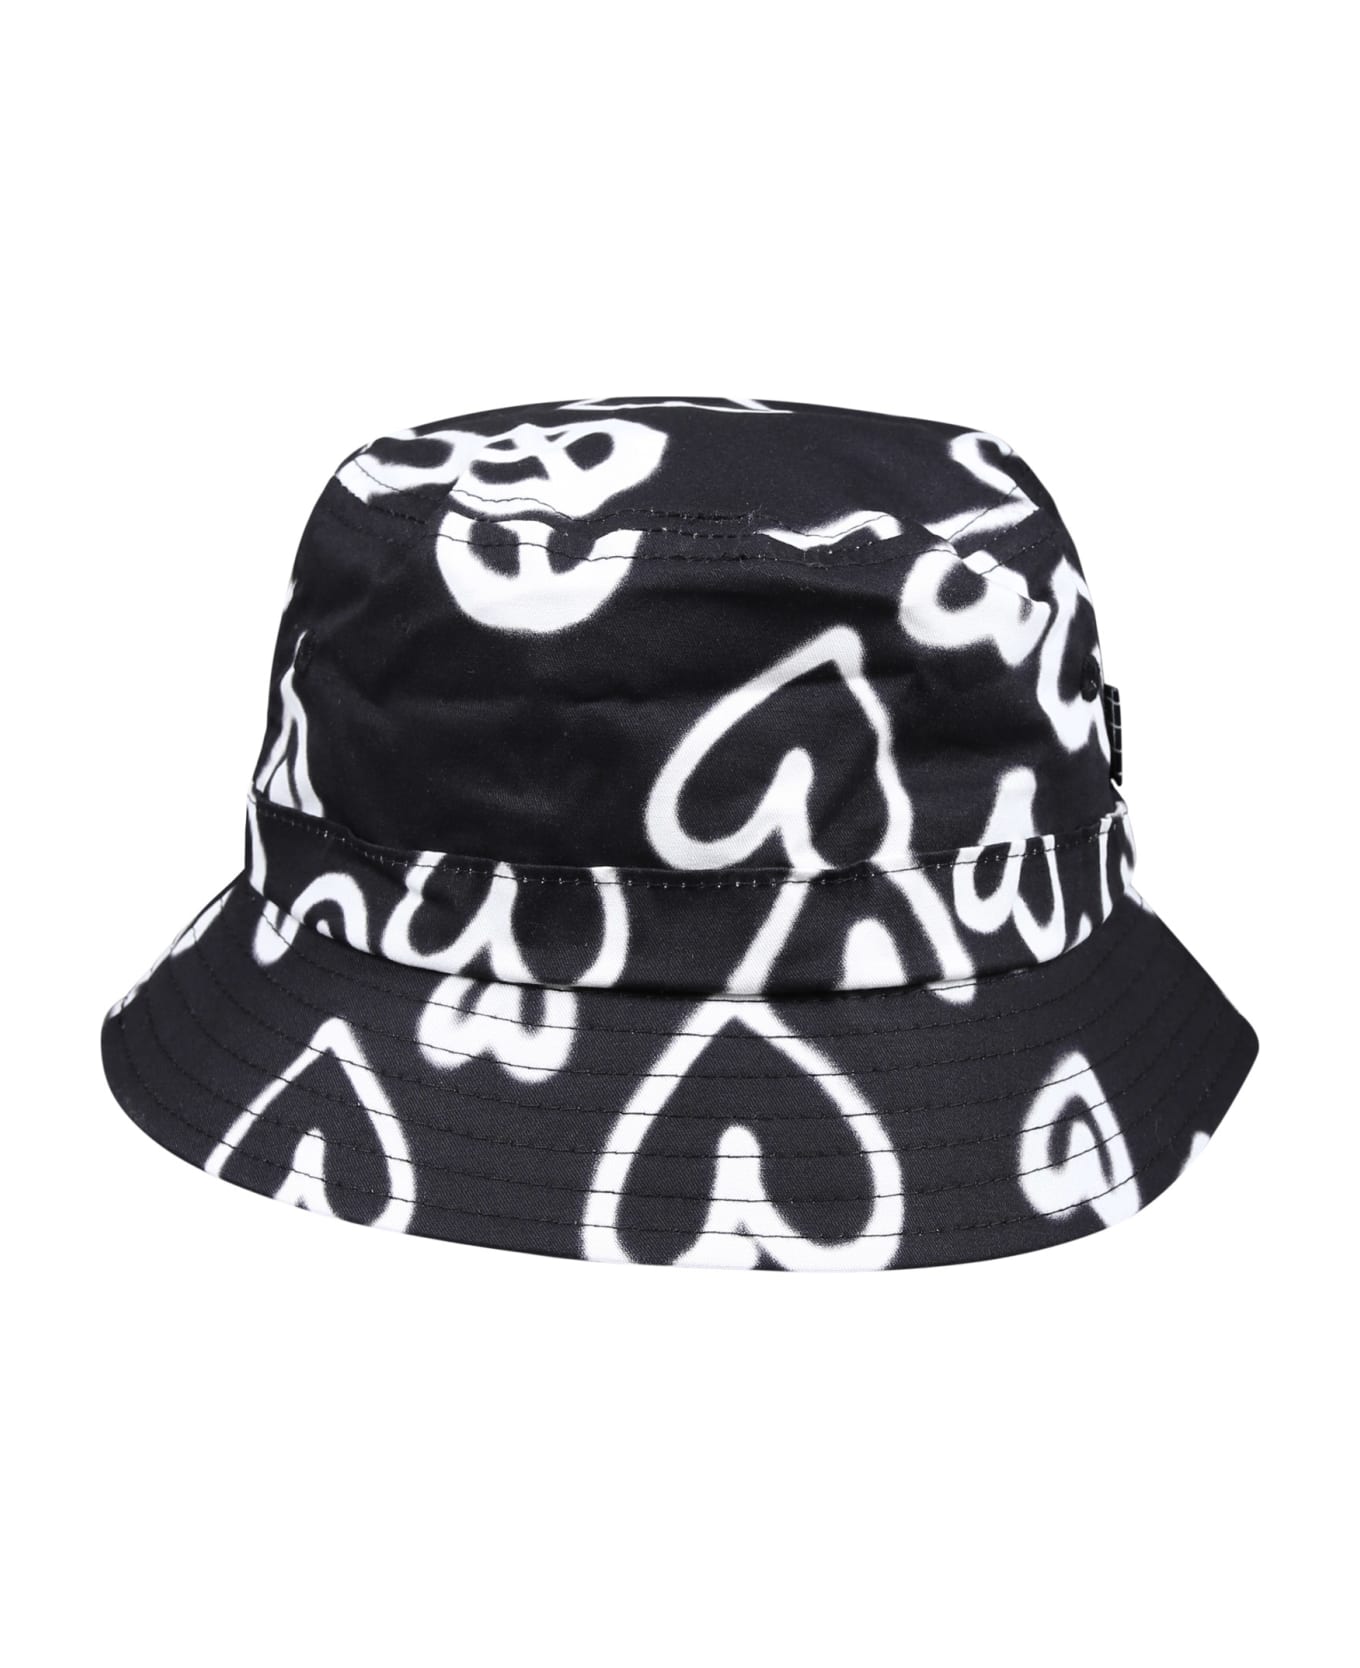 Molo Black Cloche For Kids With Hearts - Black アクセサリー＆ギフト